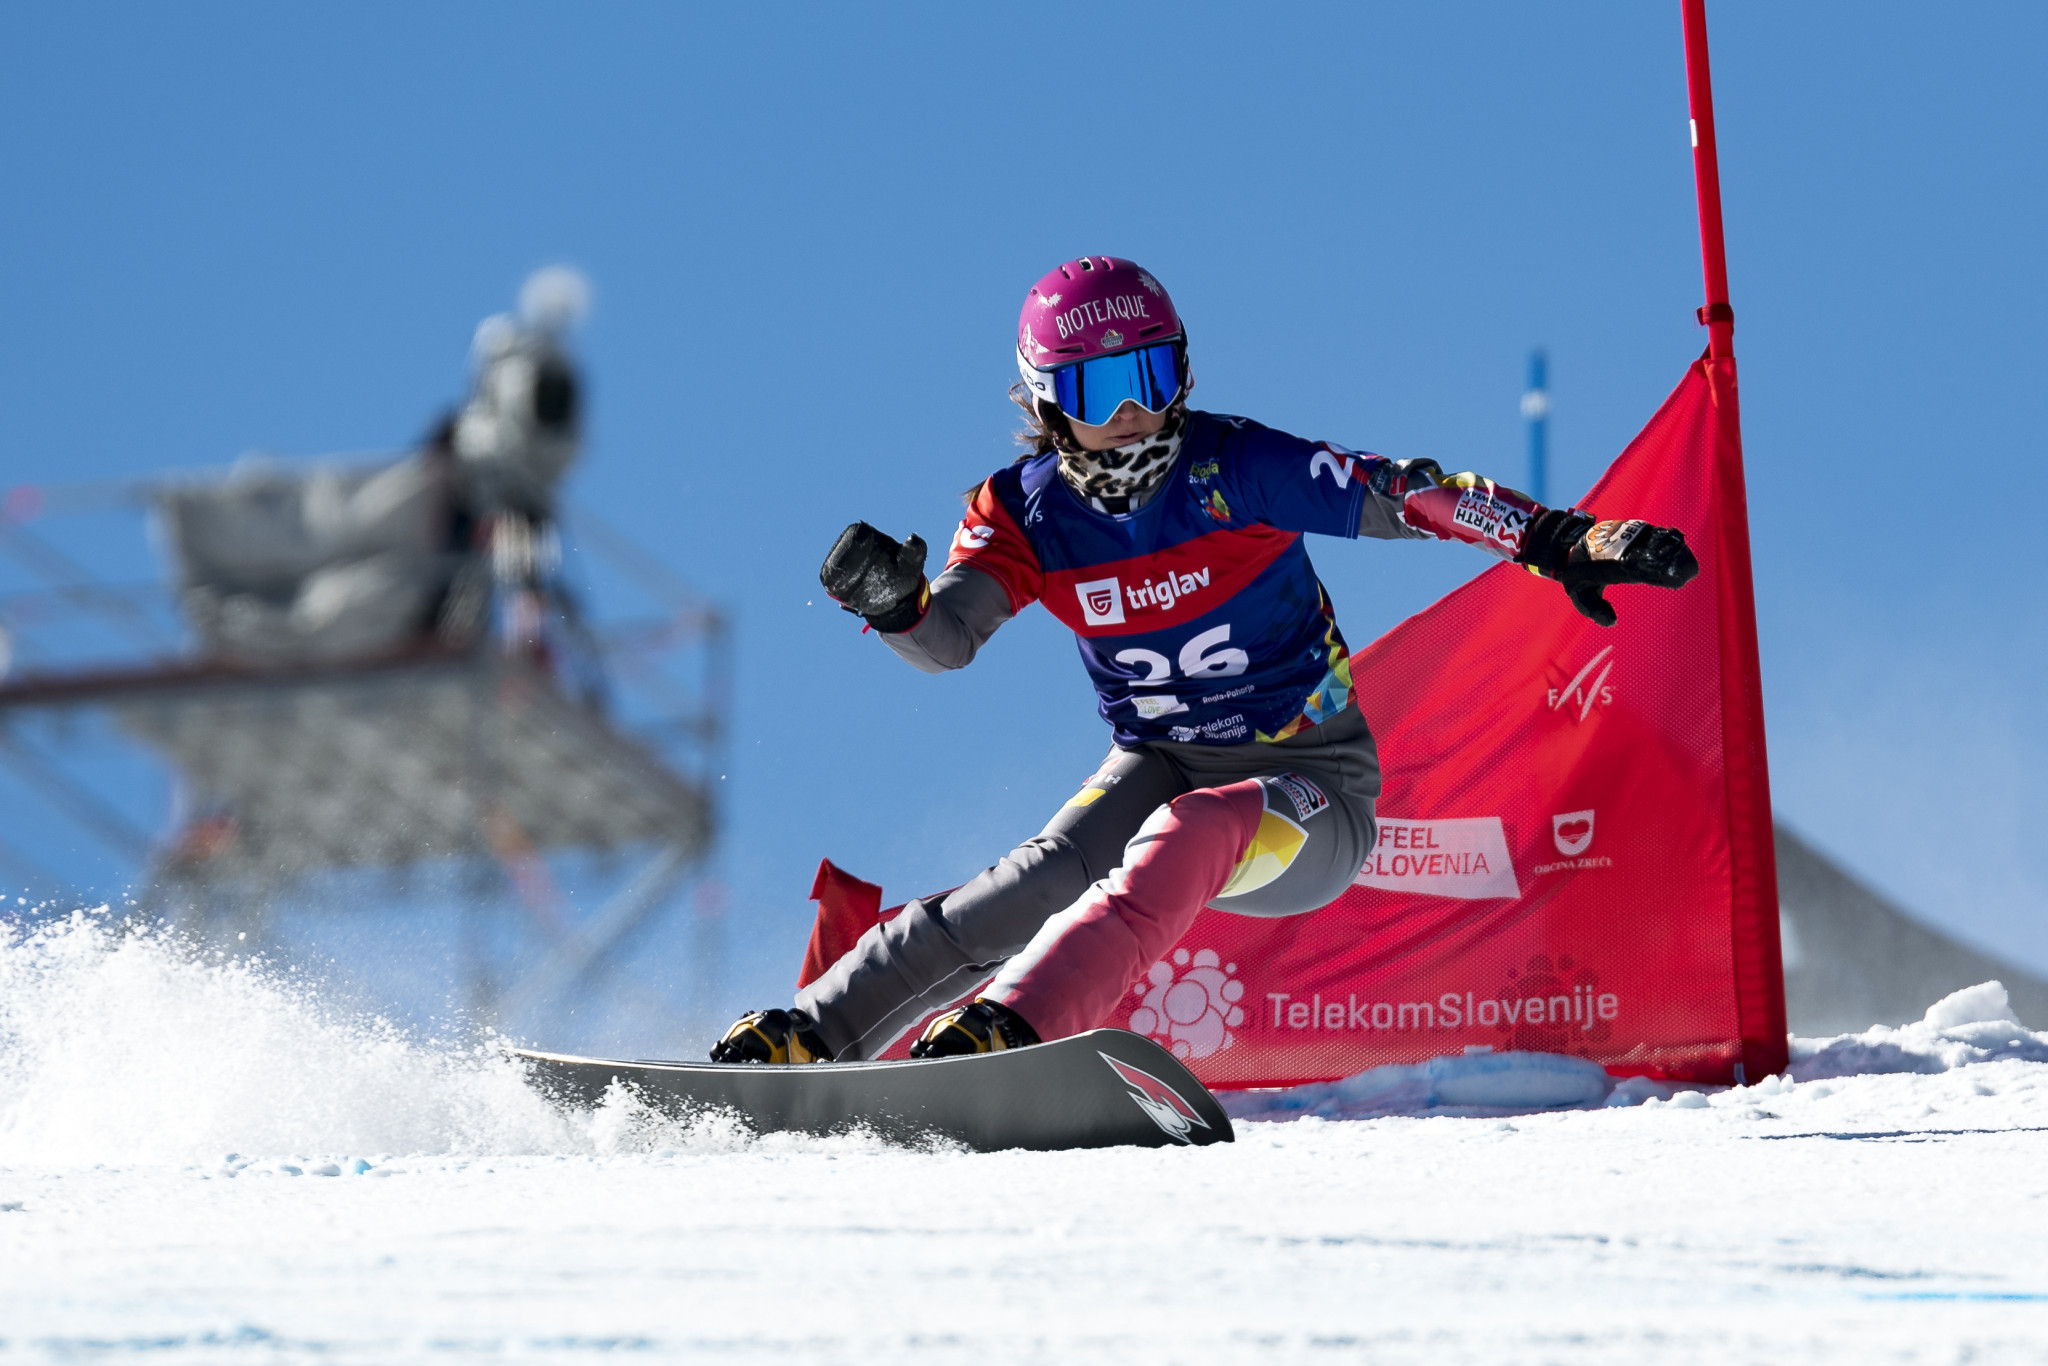 Ramona Theresia Hofmeister of Germany finished second in the season opener at Lake Bannoye and won in Carezza last year ©Getty Images